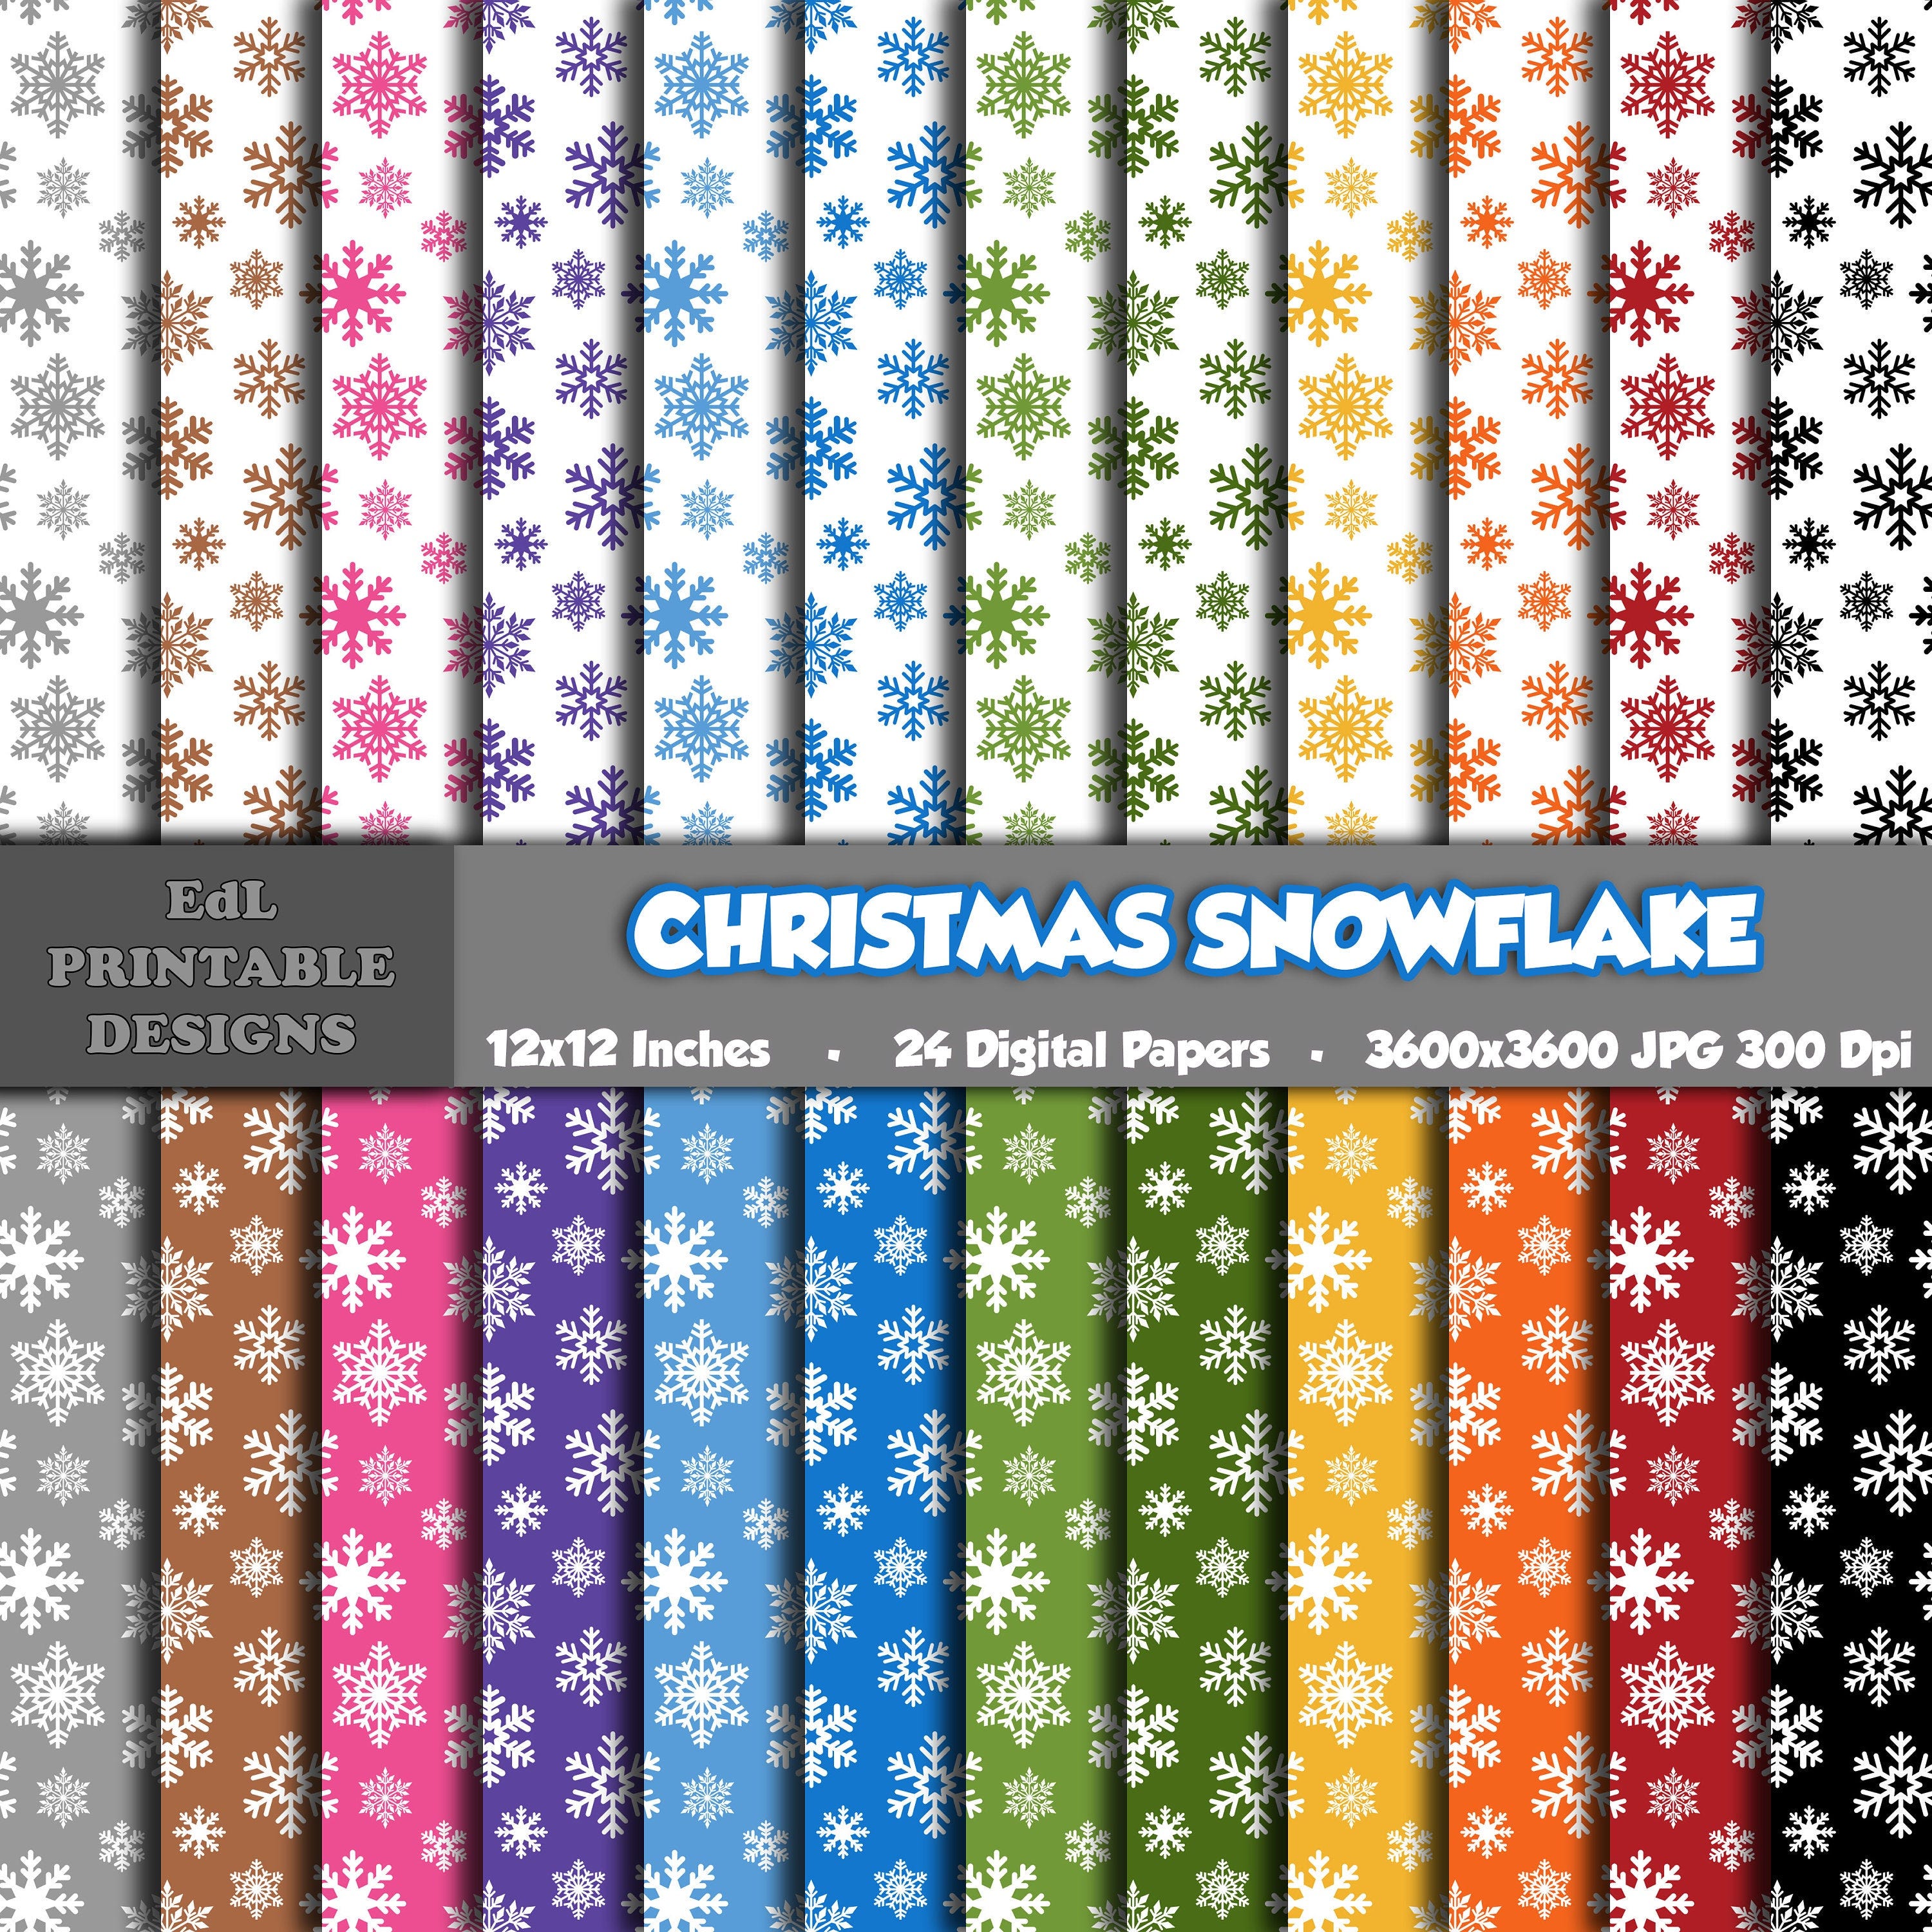 Christmas Snowflake Digital Paper, Snowfall Printable Background, Snow Confetti Scrapbook Papers, 12x12 Winter Holiday Seamless Pattern Set